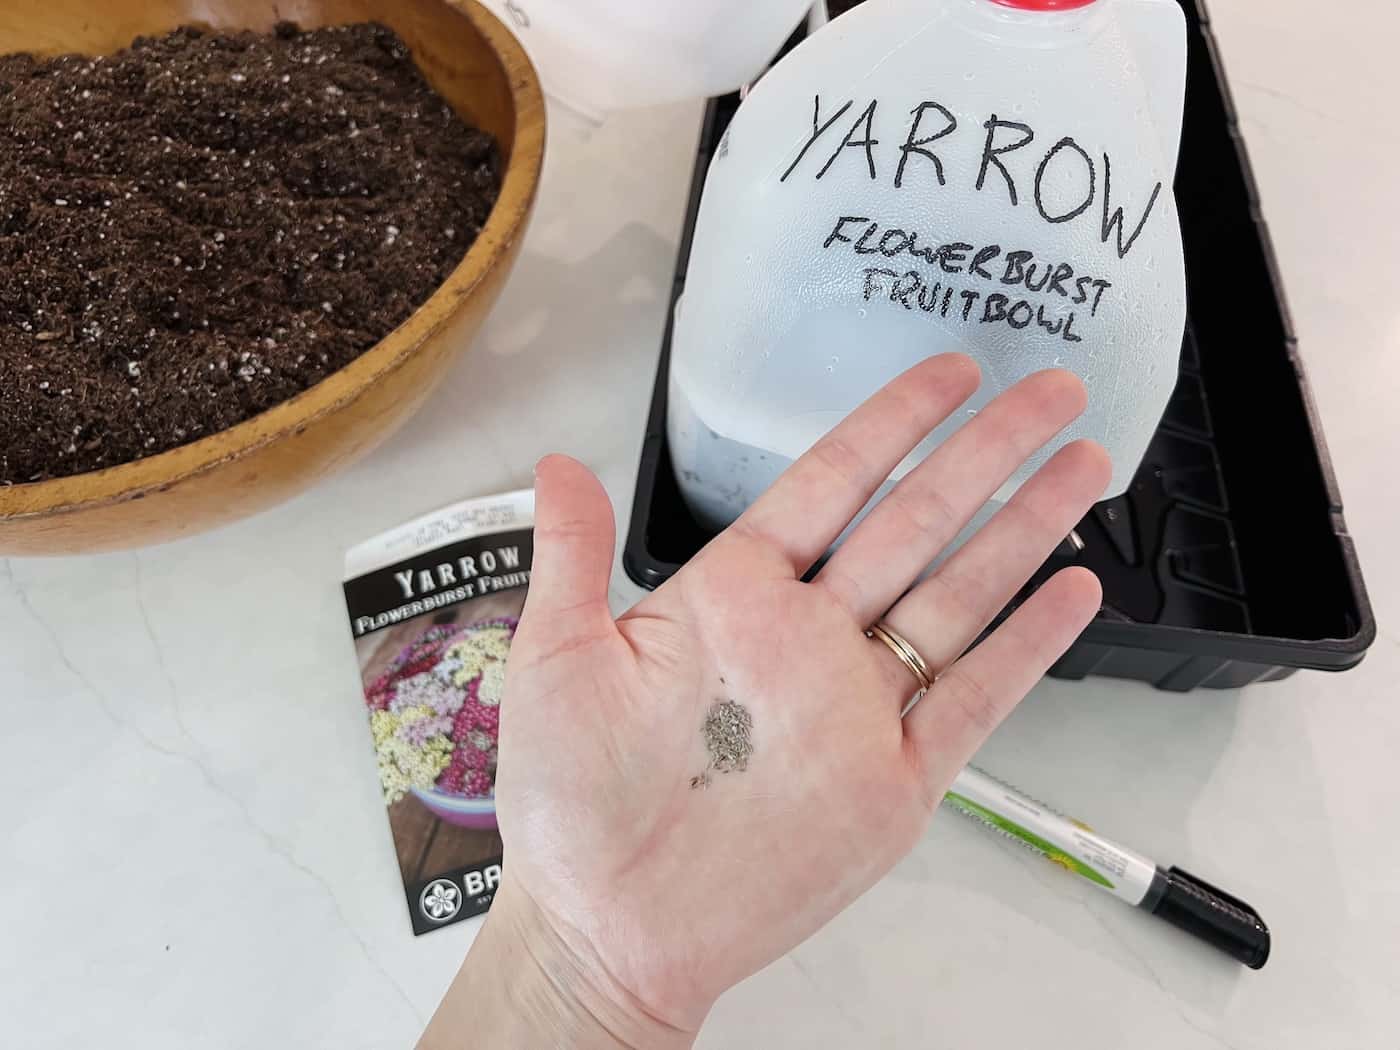 Winter sowing yarrow seeds